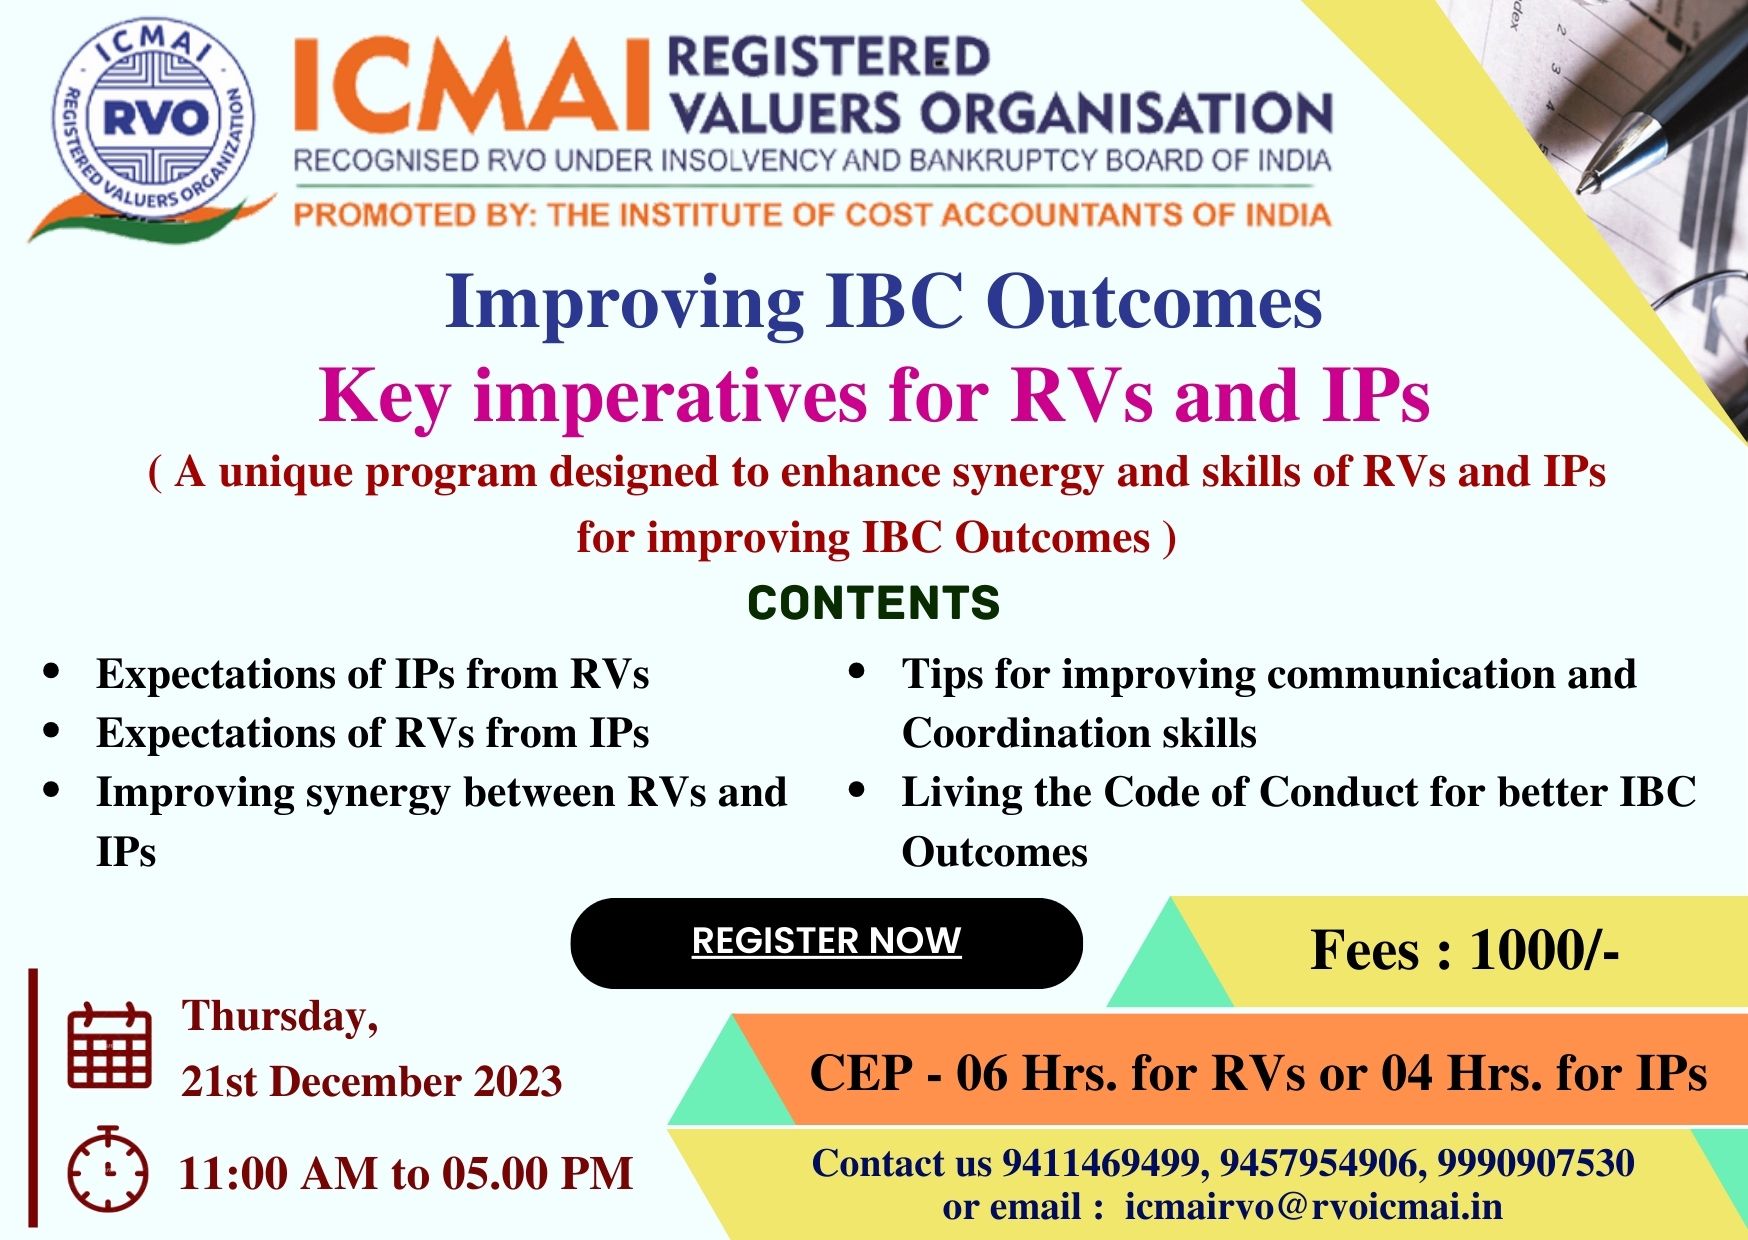 Improving IBC Outcomes key imperatives for RVs and IPs on 21st December 2023